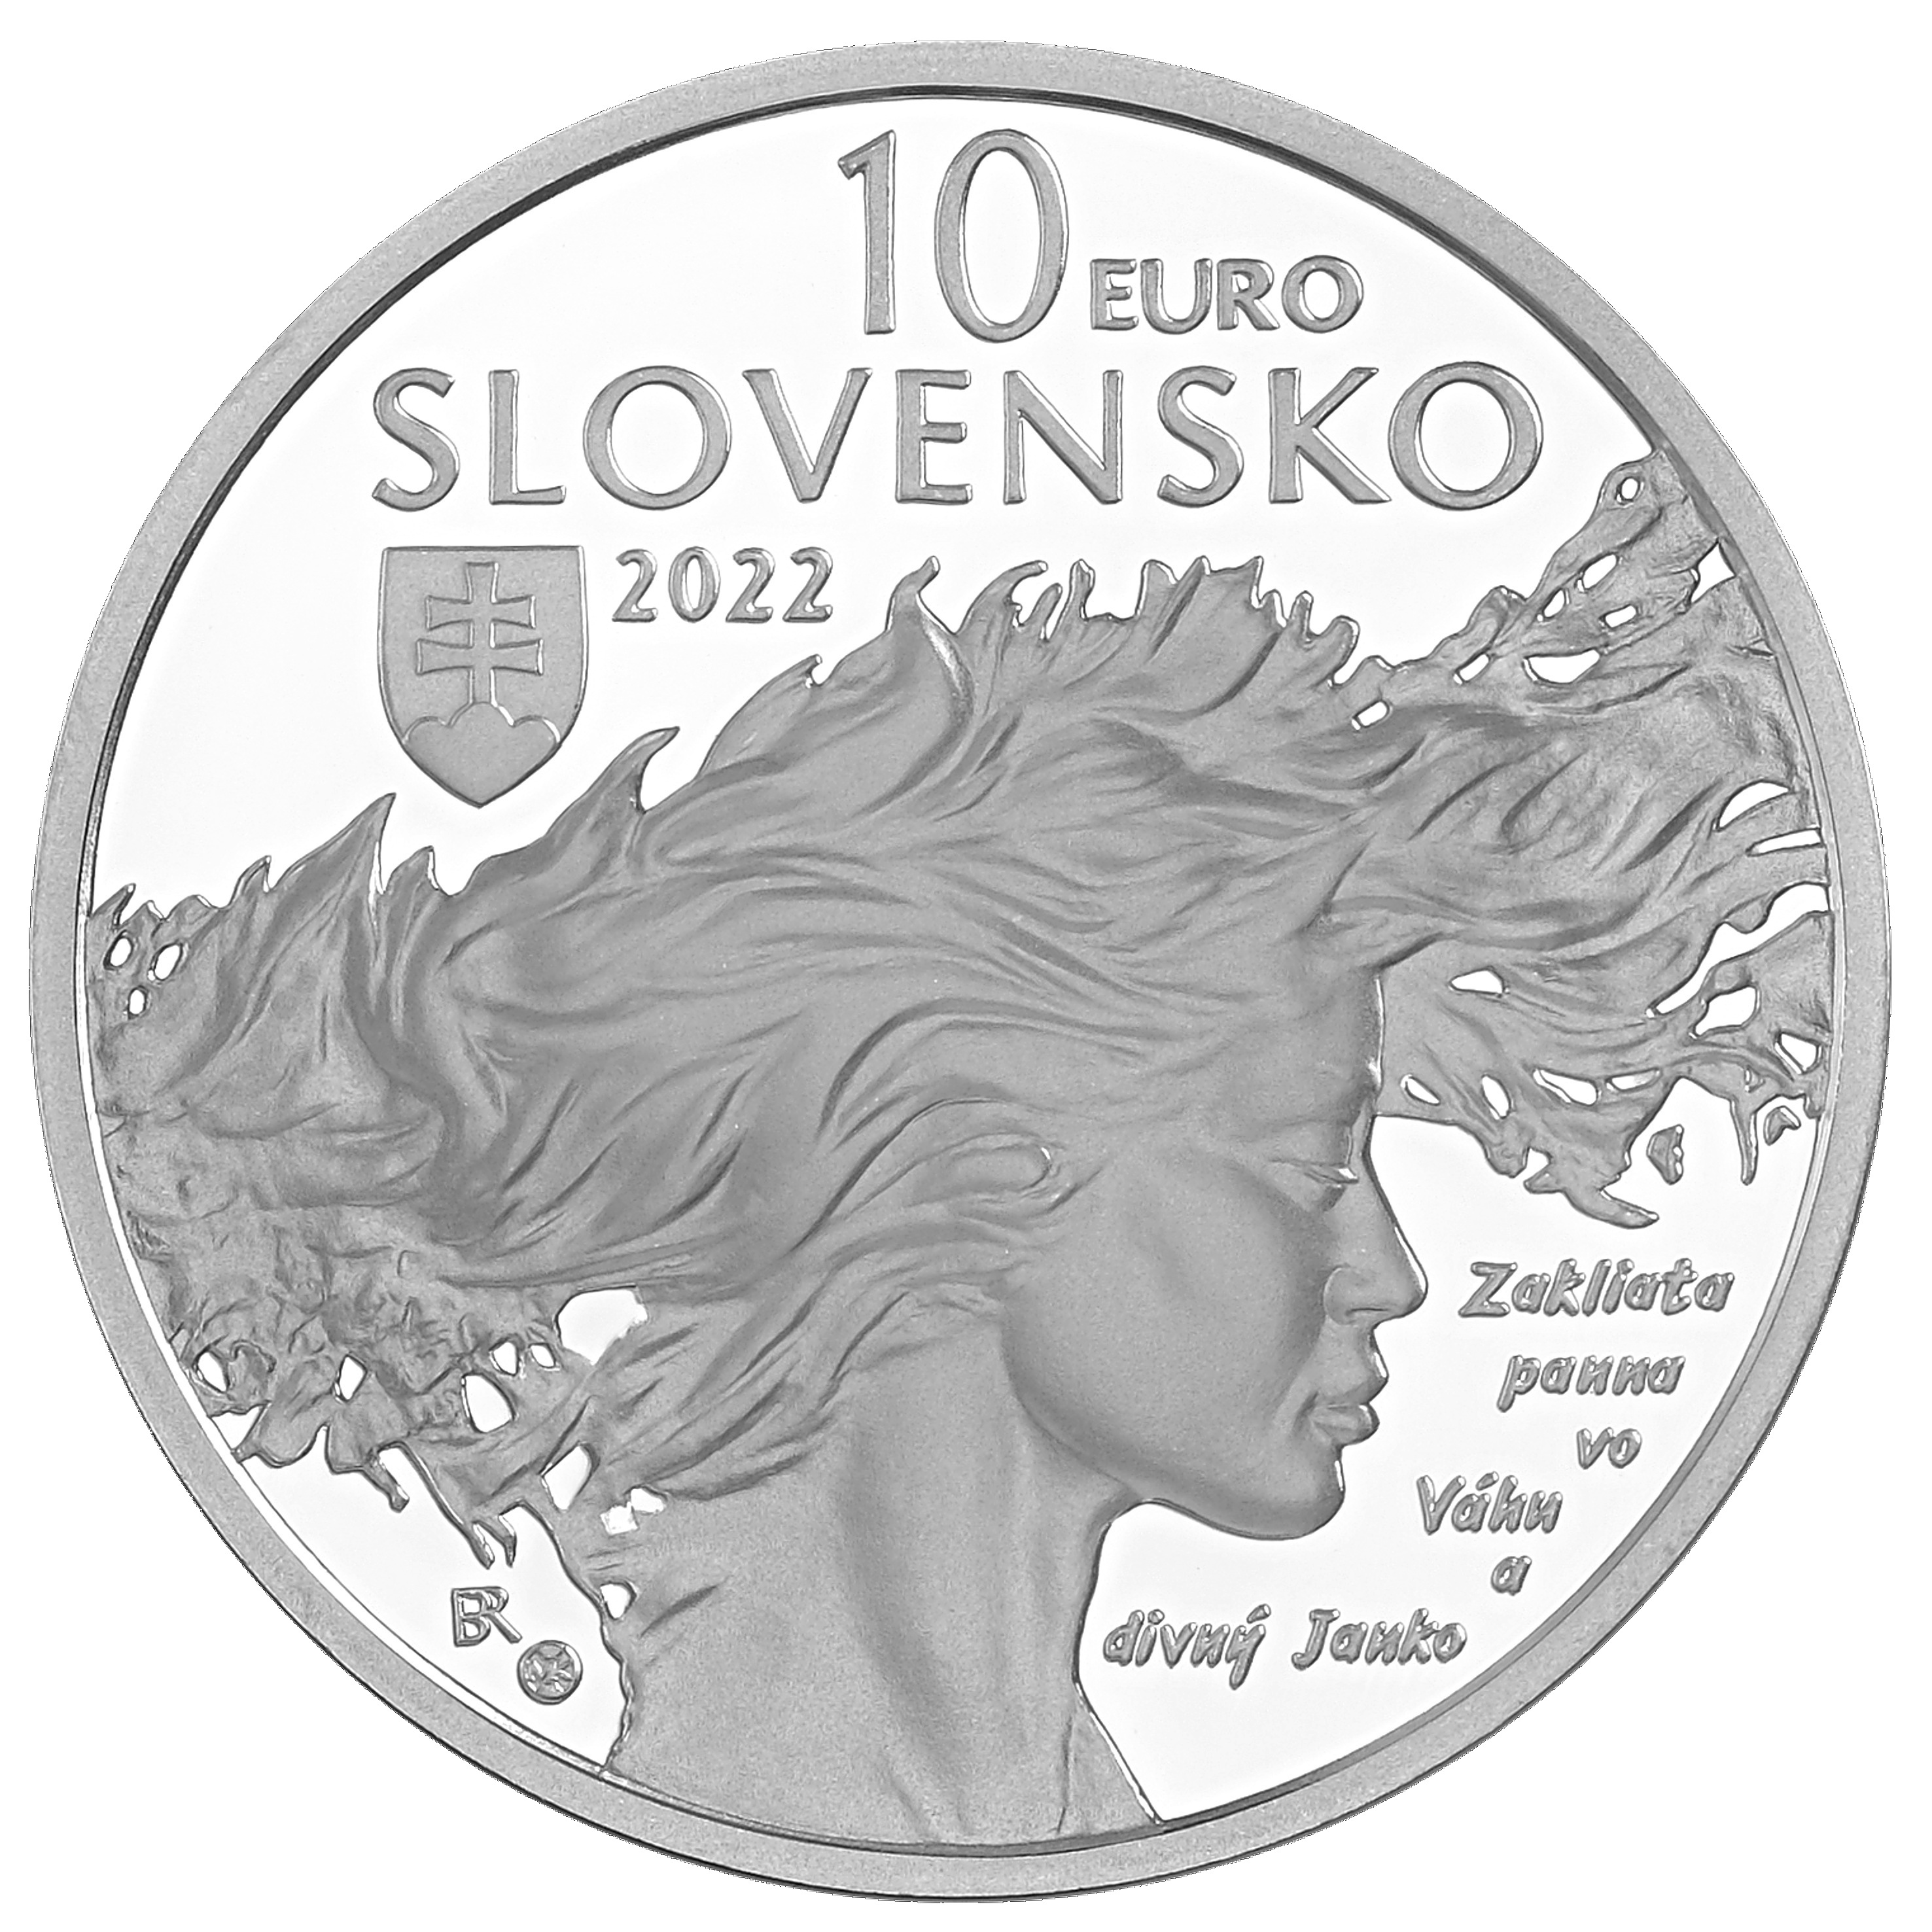 Issuance of a coin marking the 200th anniversary of Janko Kráľ´s birth